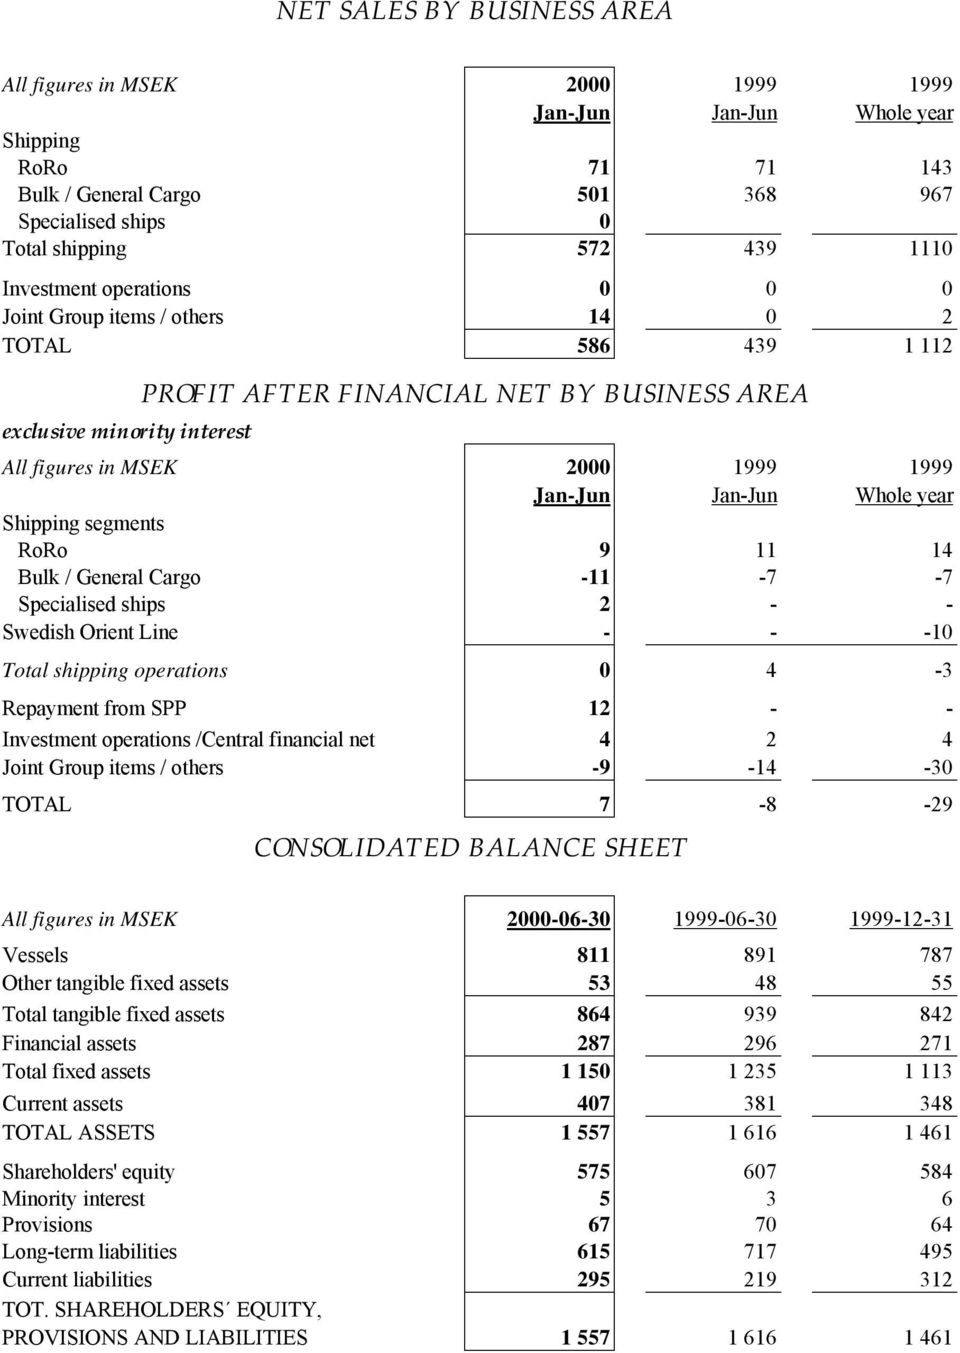 Total shipping operations 0 4-3 Repayment from SPP 12 - - Investment operations /Central financial net 4 2 4 Joint Group items / others -9-14 -30 TOTAL 7-8 -29 CONSOLIDATED BALANCE SHEET All figures